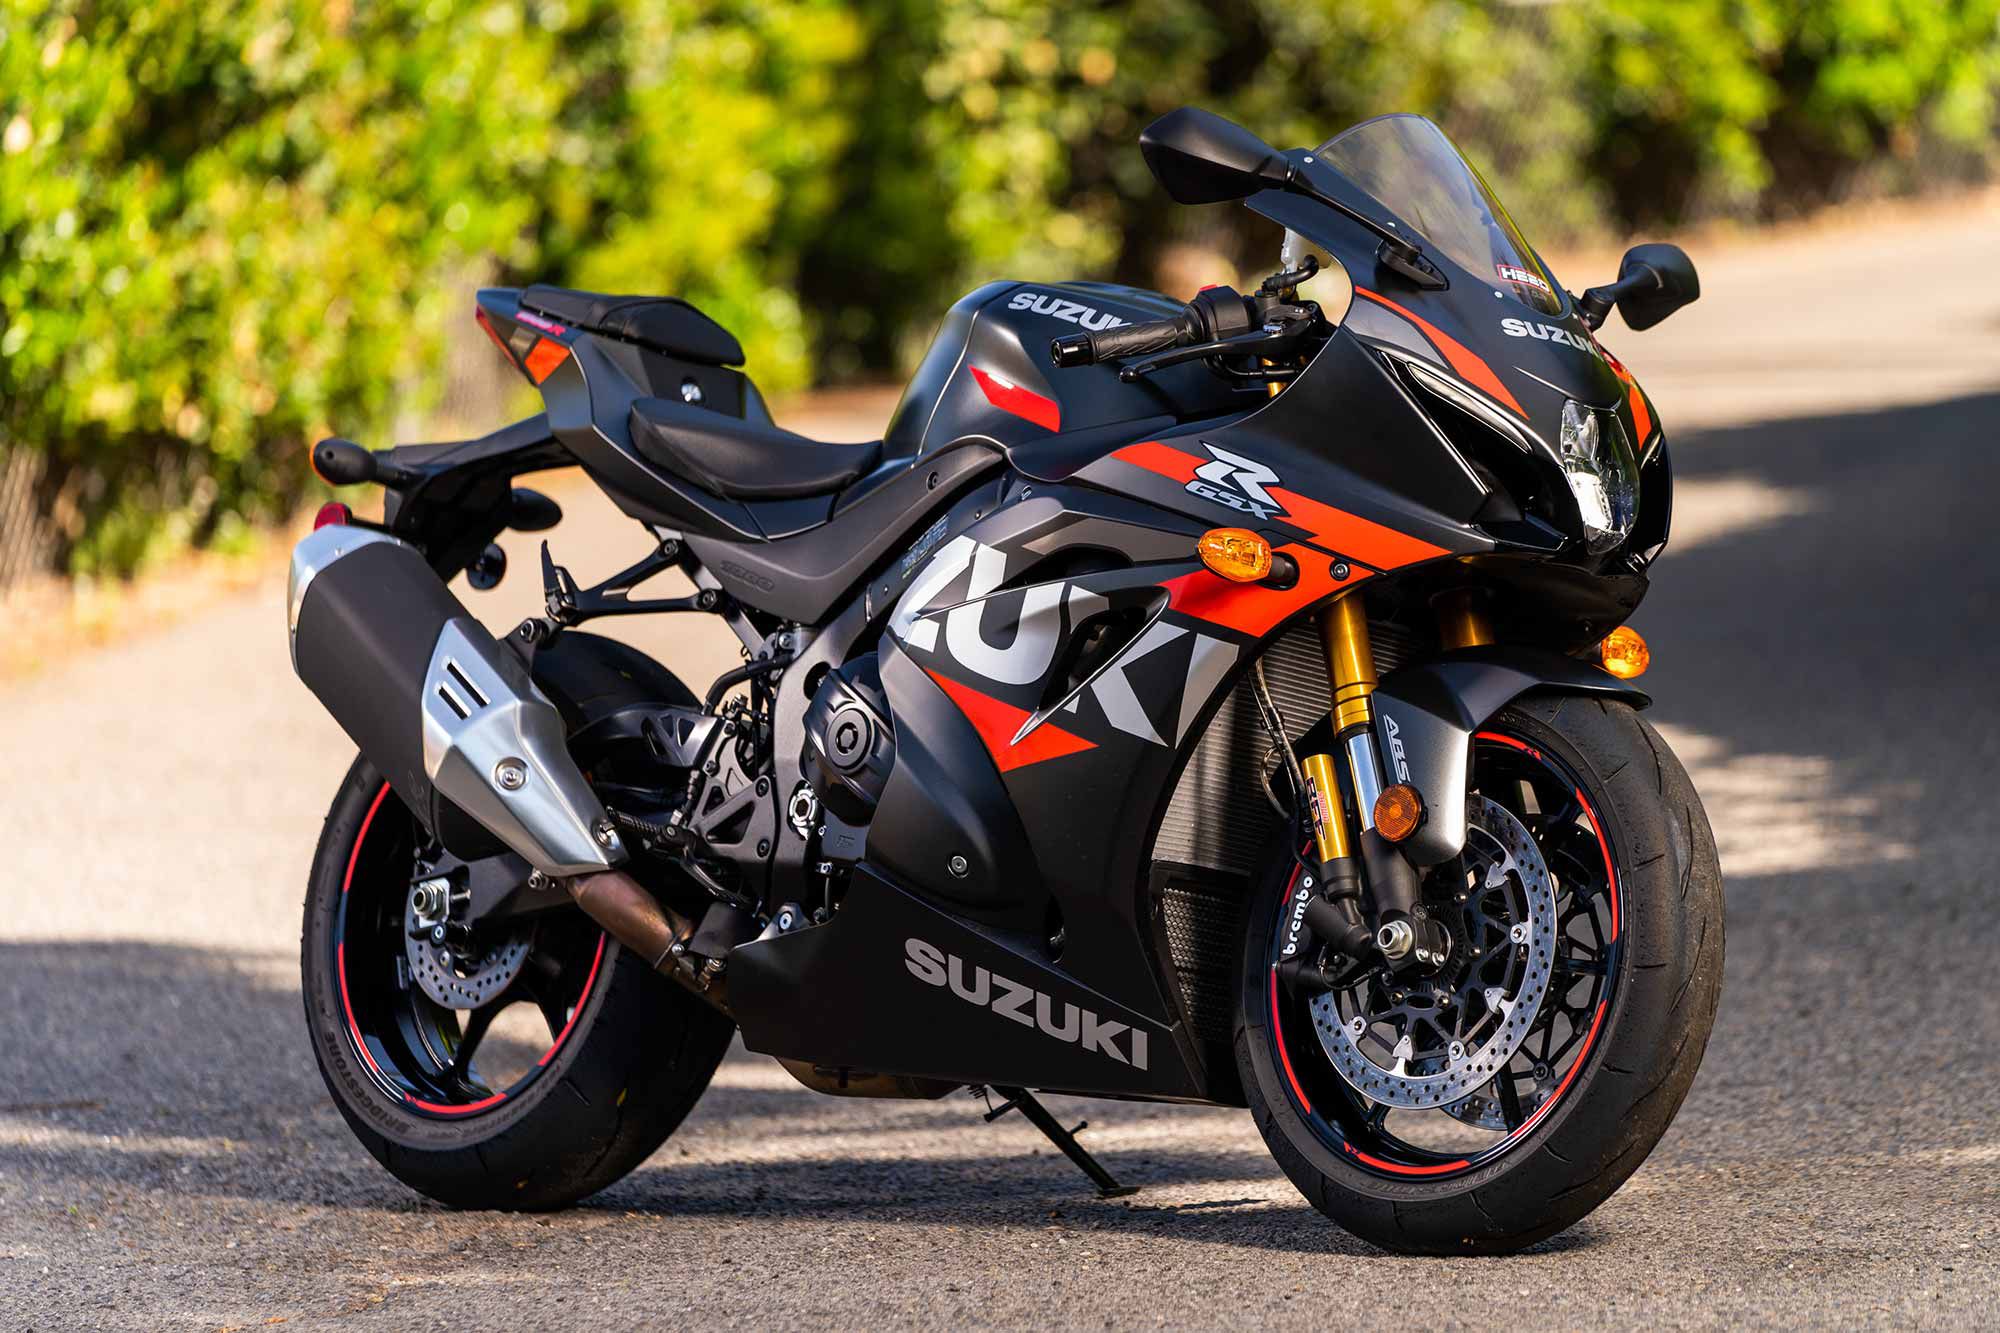 We love the livery and color combination of the 2021 GSX-R1000R. It looks clean, yet makes a racy statement when parked.